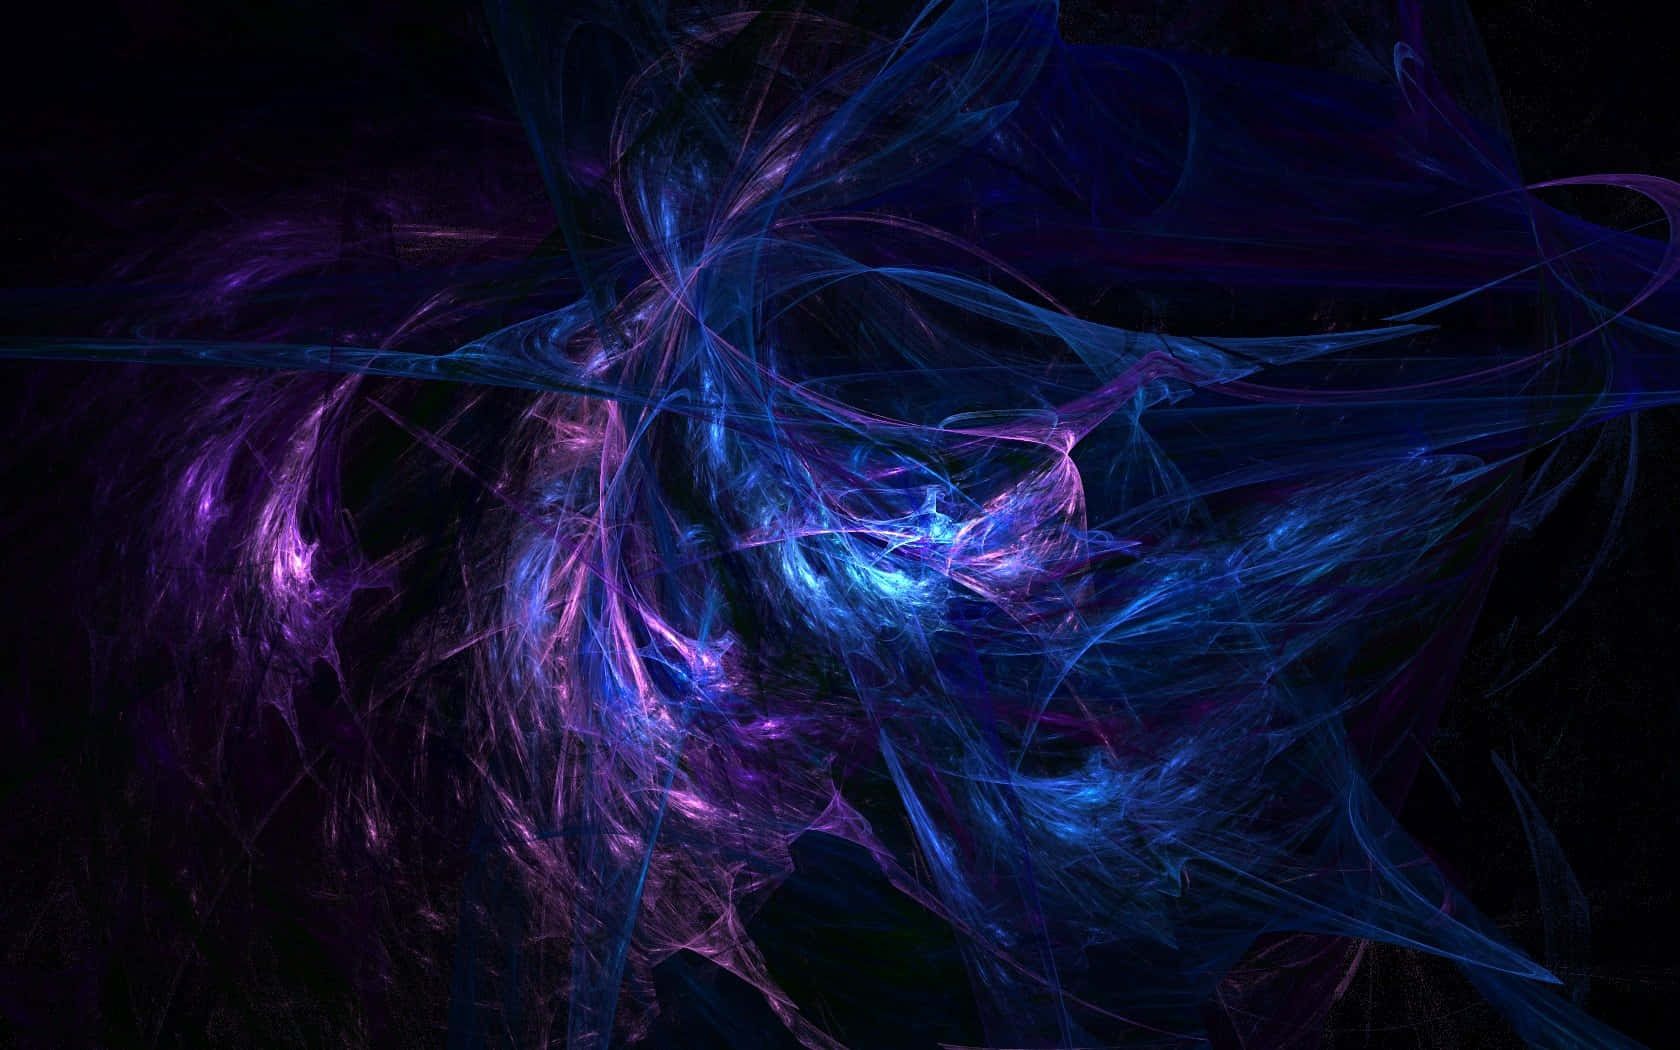 "Discover a World of Colorful Trippiness with Trippy Blue" Wallpaper